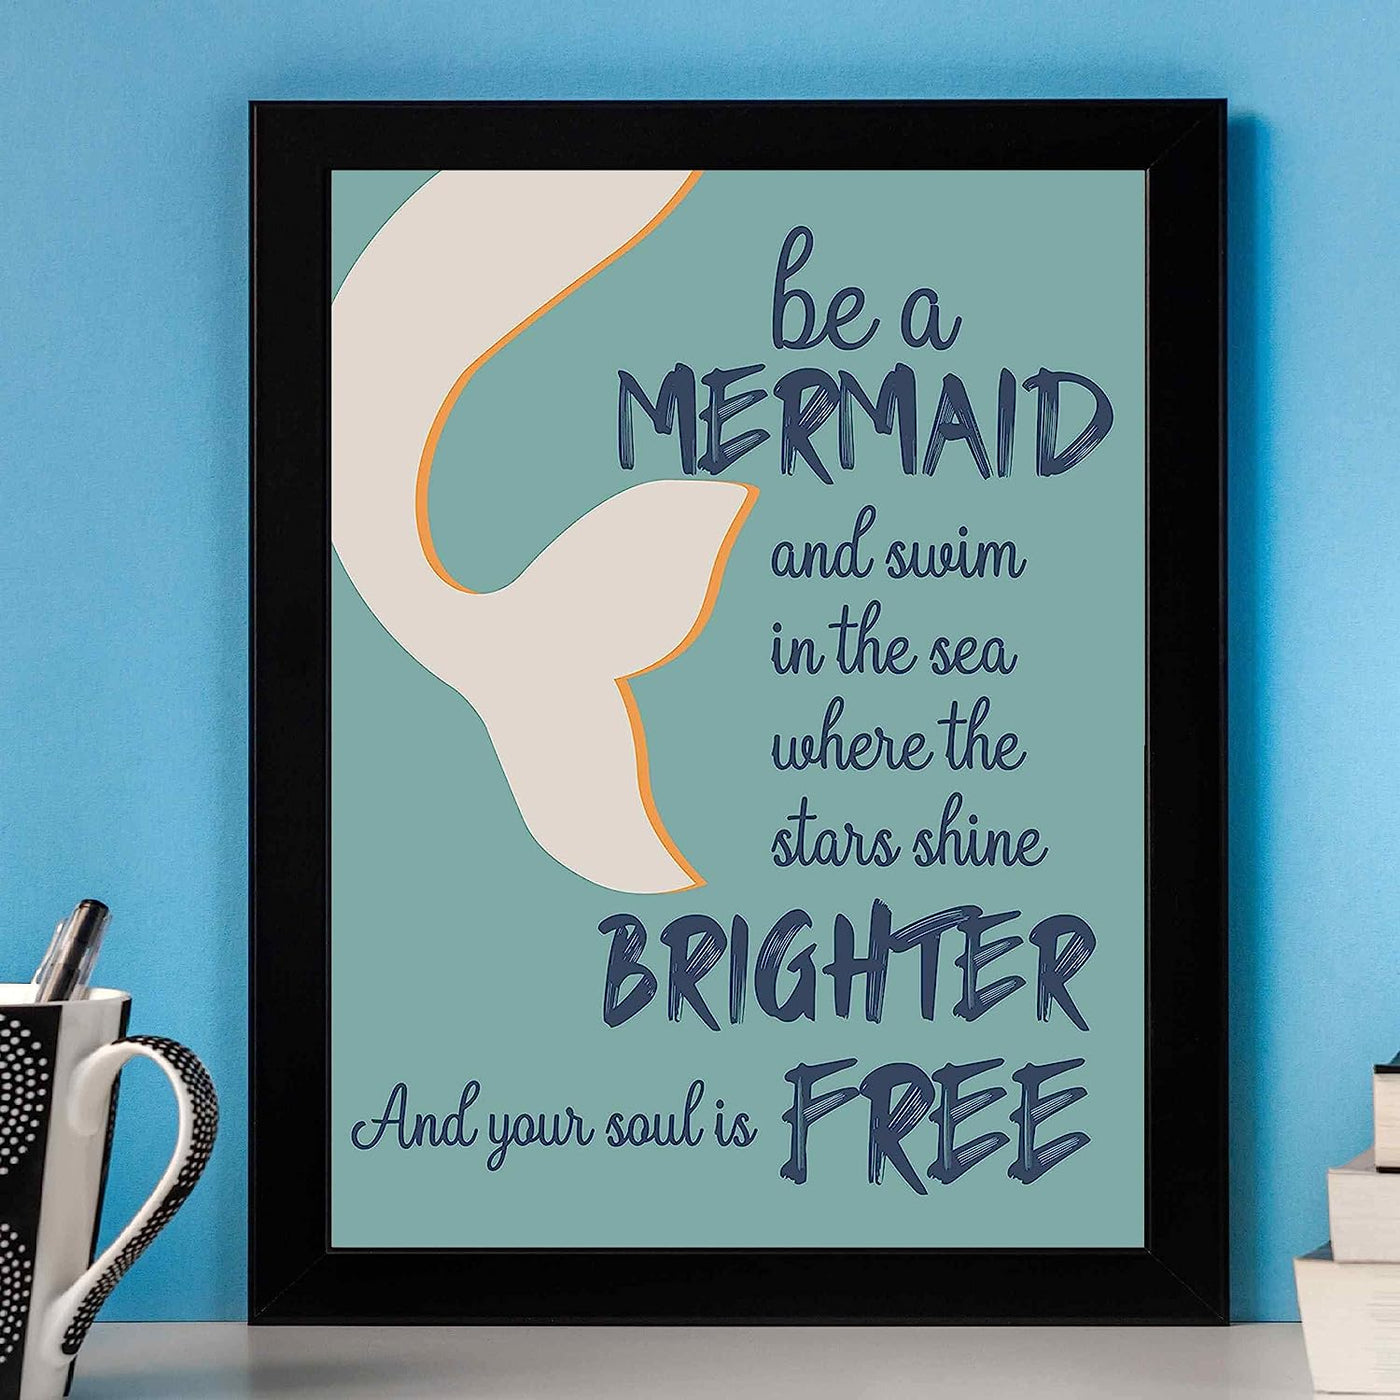 Be a Mermaid-Swim in the Sea Inspirational Beach Sign -8 x 10" Wall Print-Ready to Frame. Nautical Art Print w/Mermaid Tail Image. Home-Girls Bedroom-Ocean Themed Decor. Great for the Beach House!